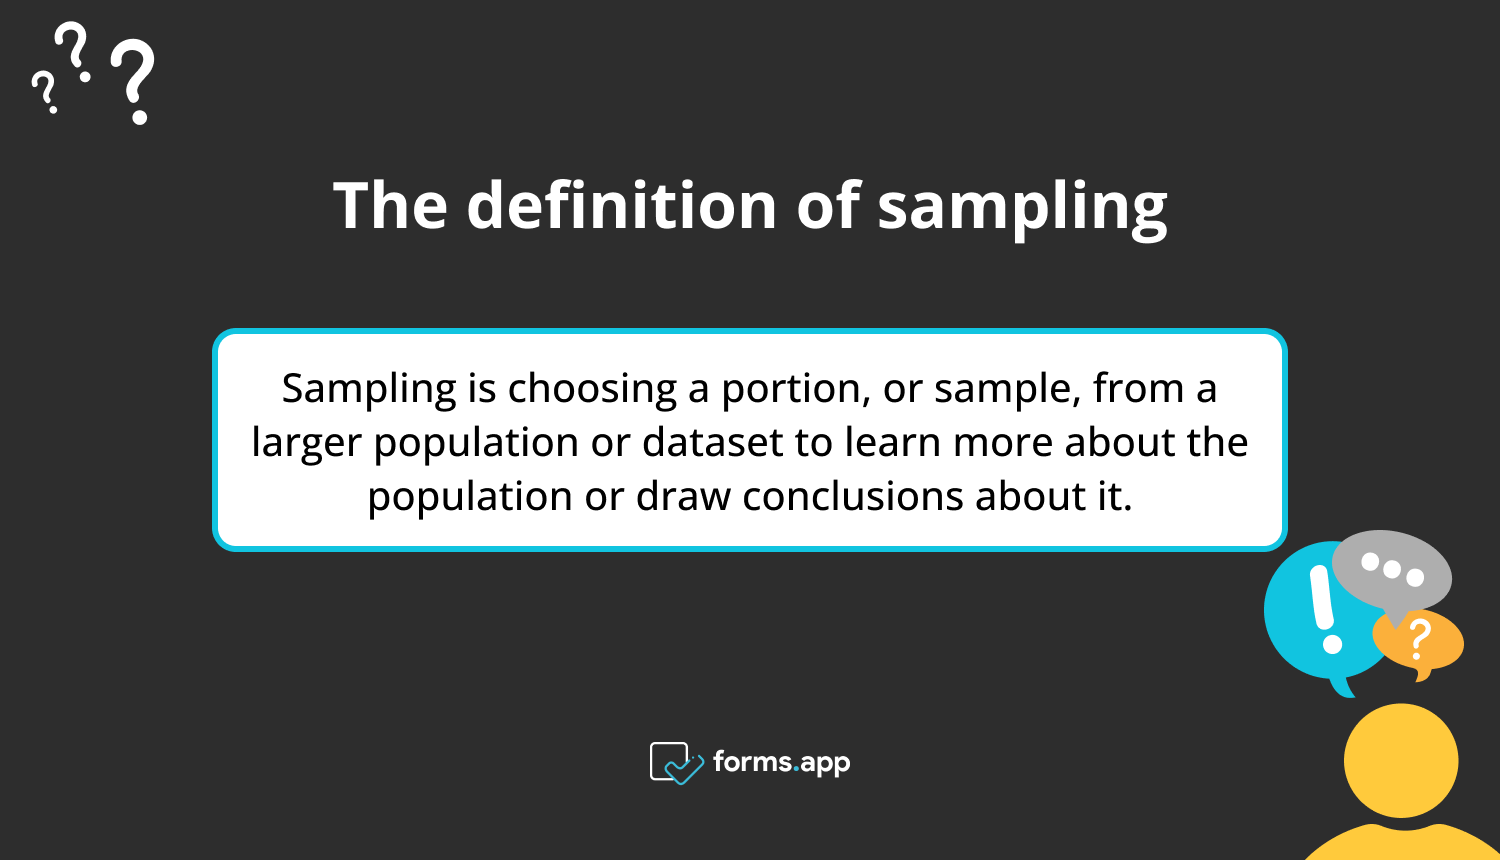 The definition of sampling